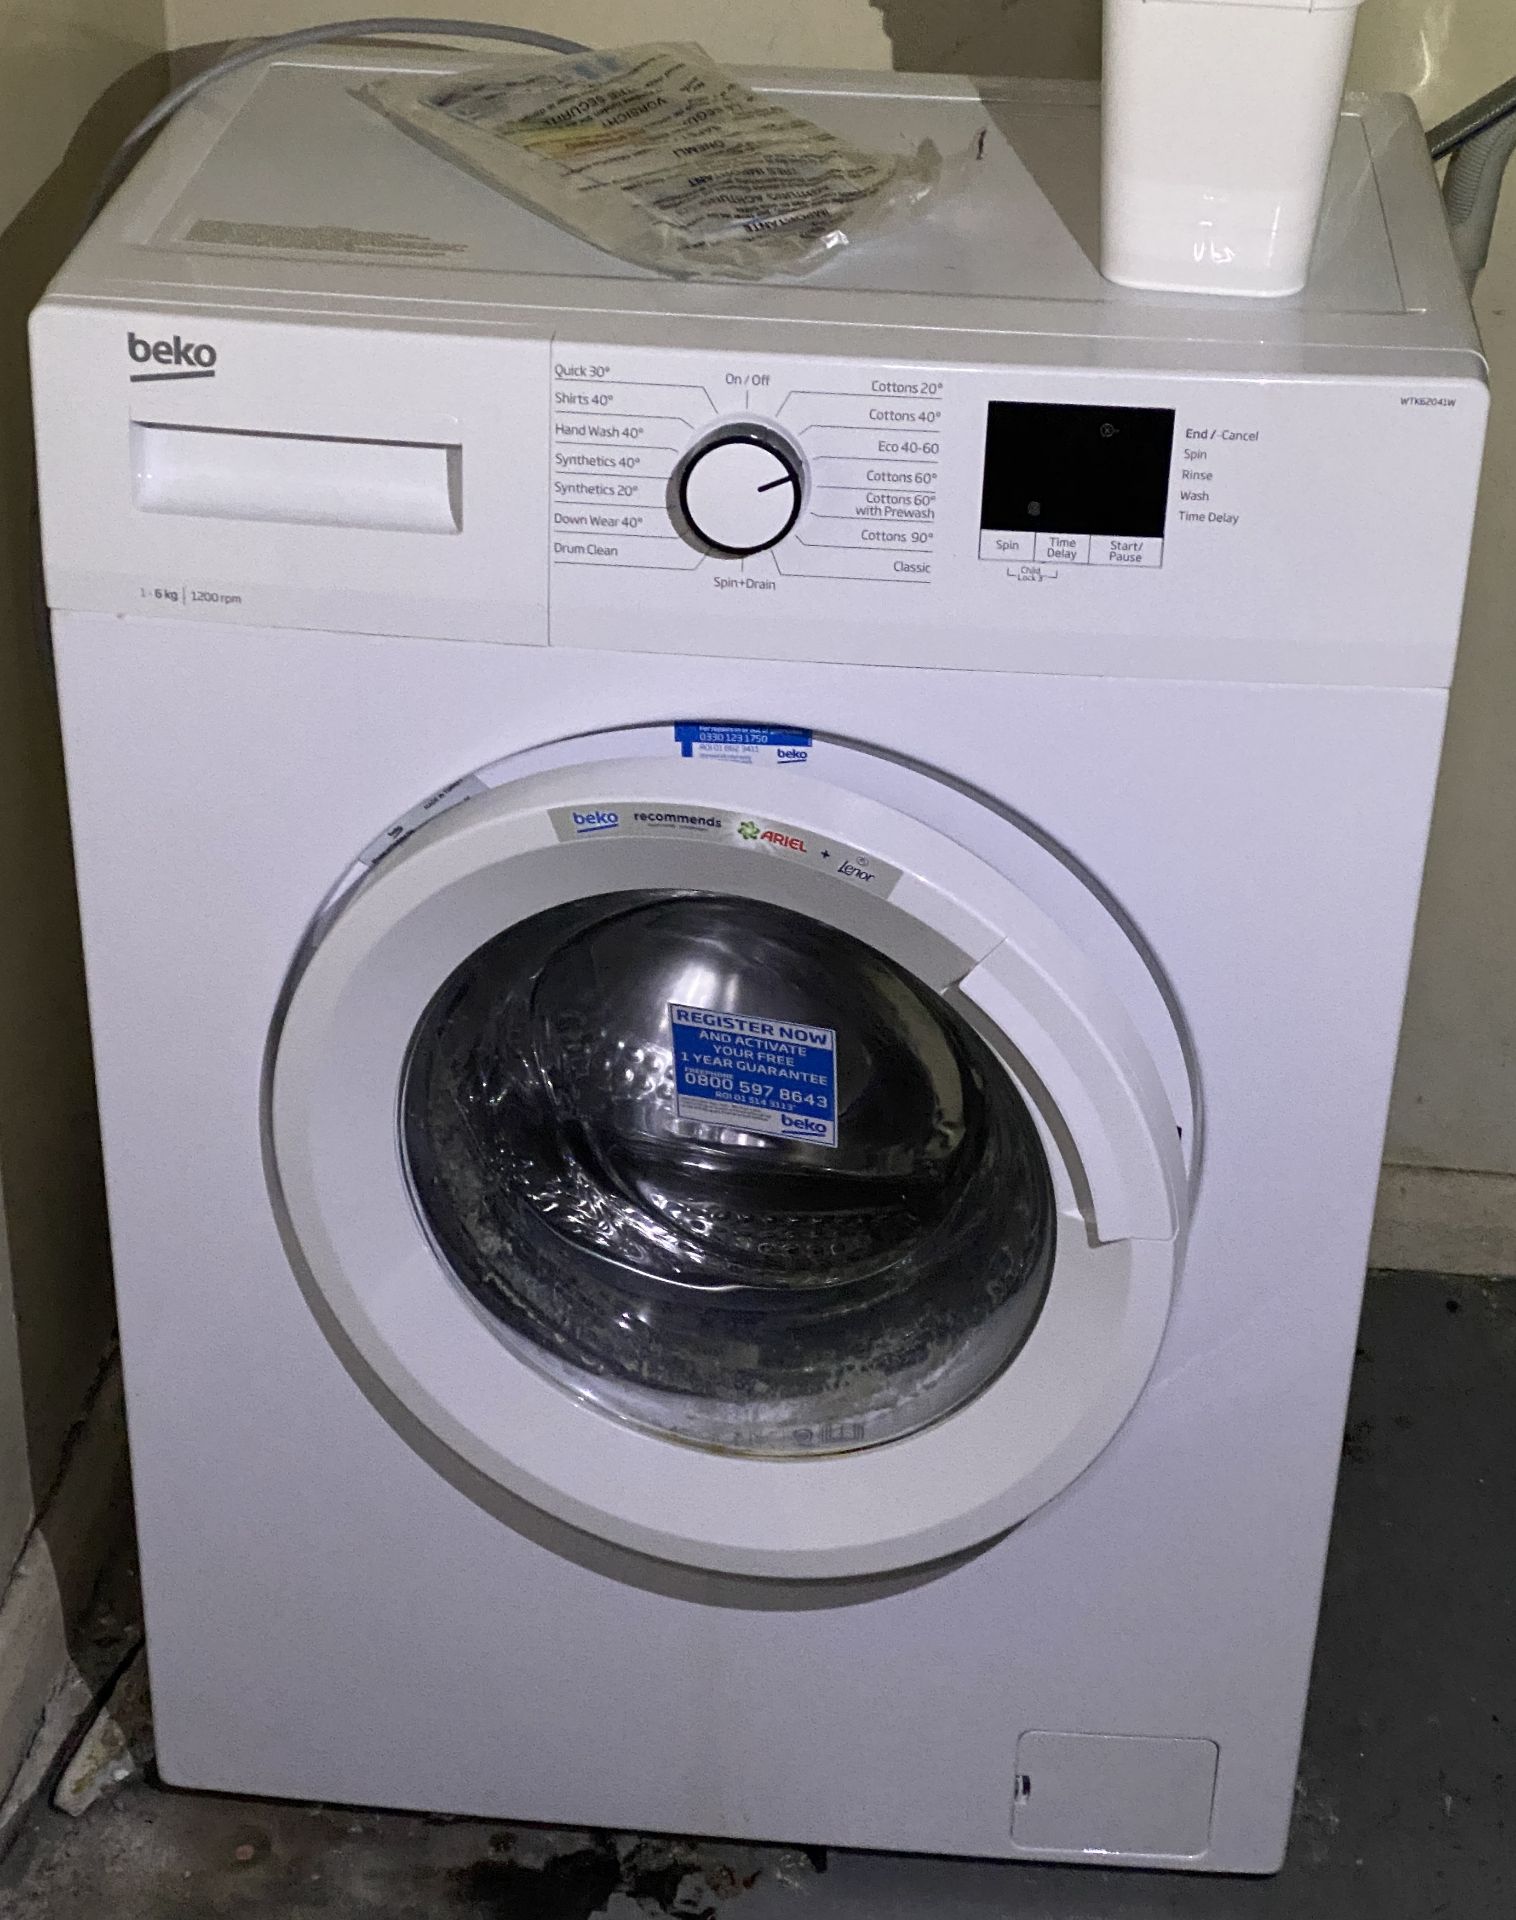 Beko WTK62041W 6kg washing machine and a White Knight 44AW tumble dryer - Not PAT tested - Please